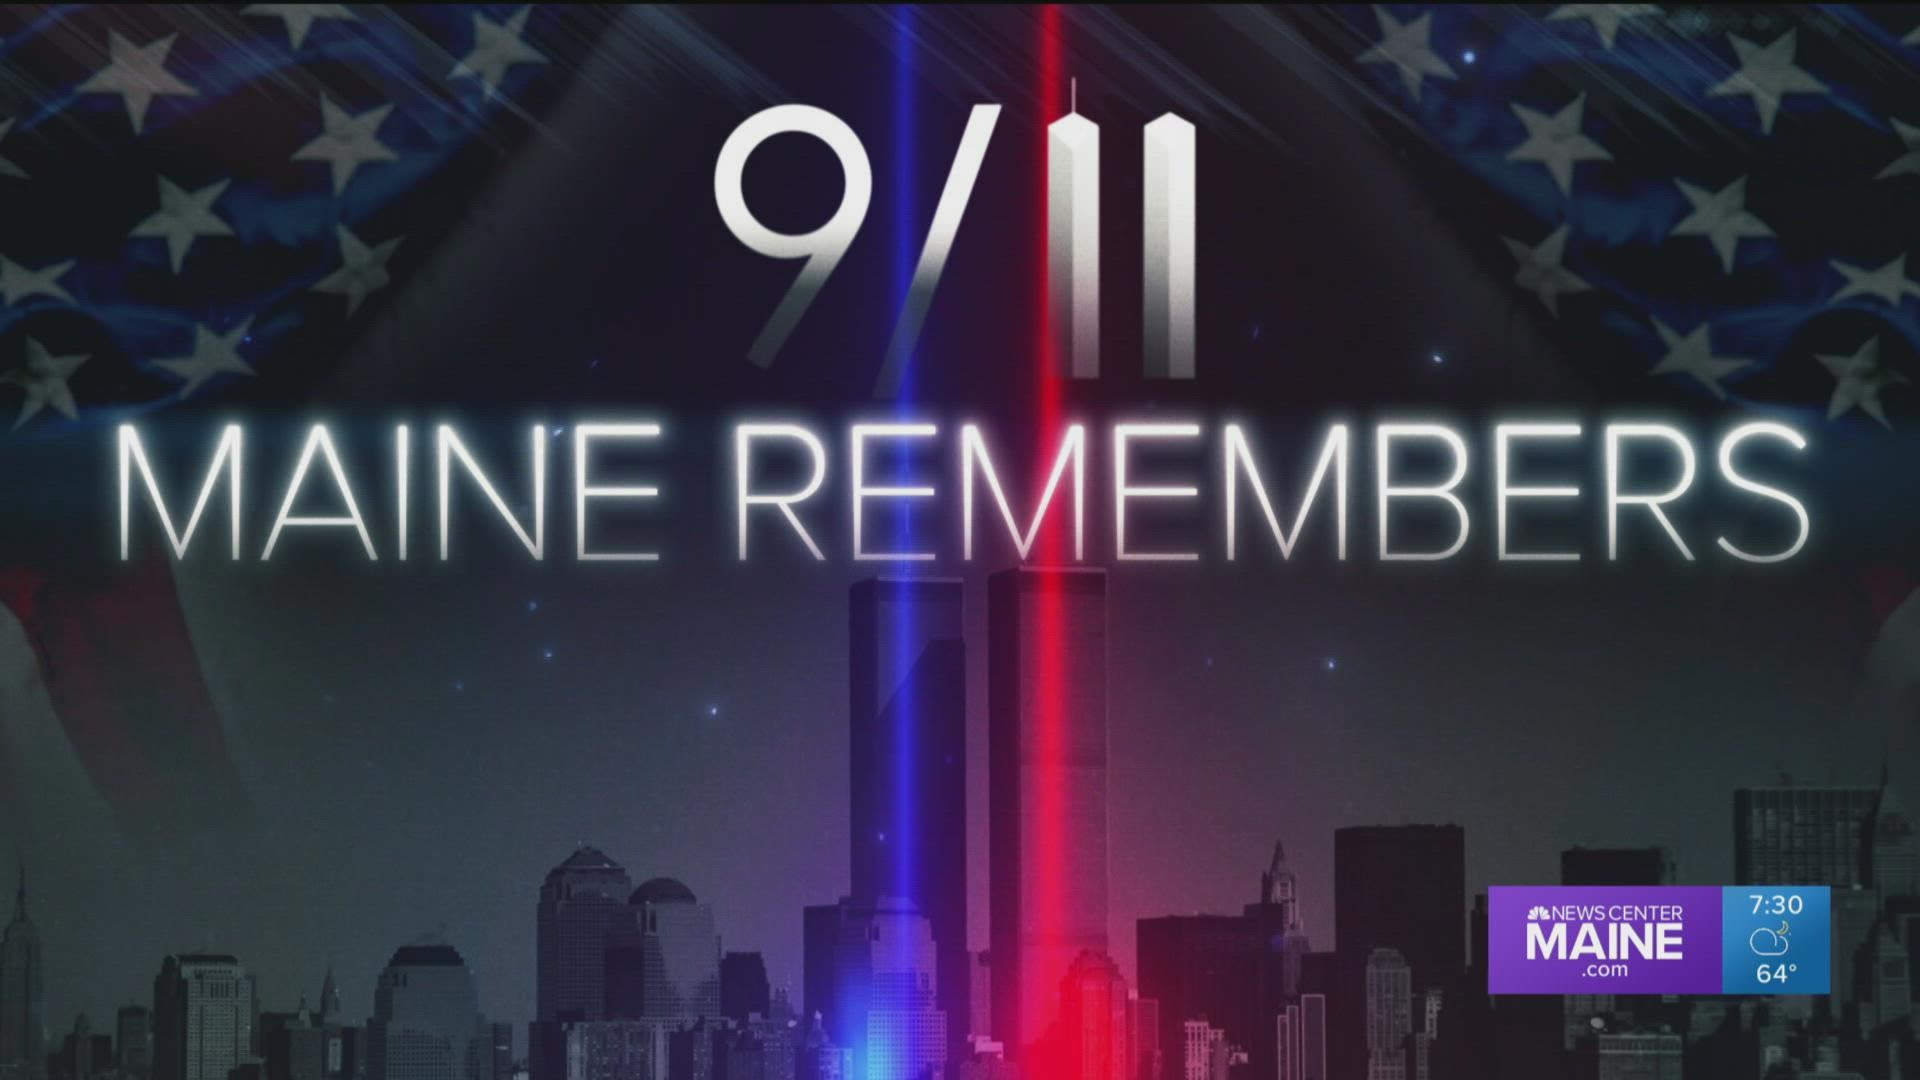 Mainers remember where they were on September 11, 2001. NEWS CENTER Maine takes a look back at the horrific day and the remembrances